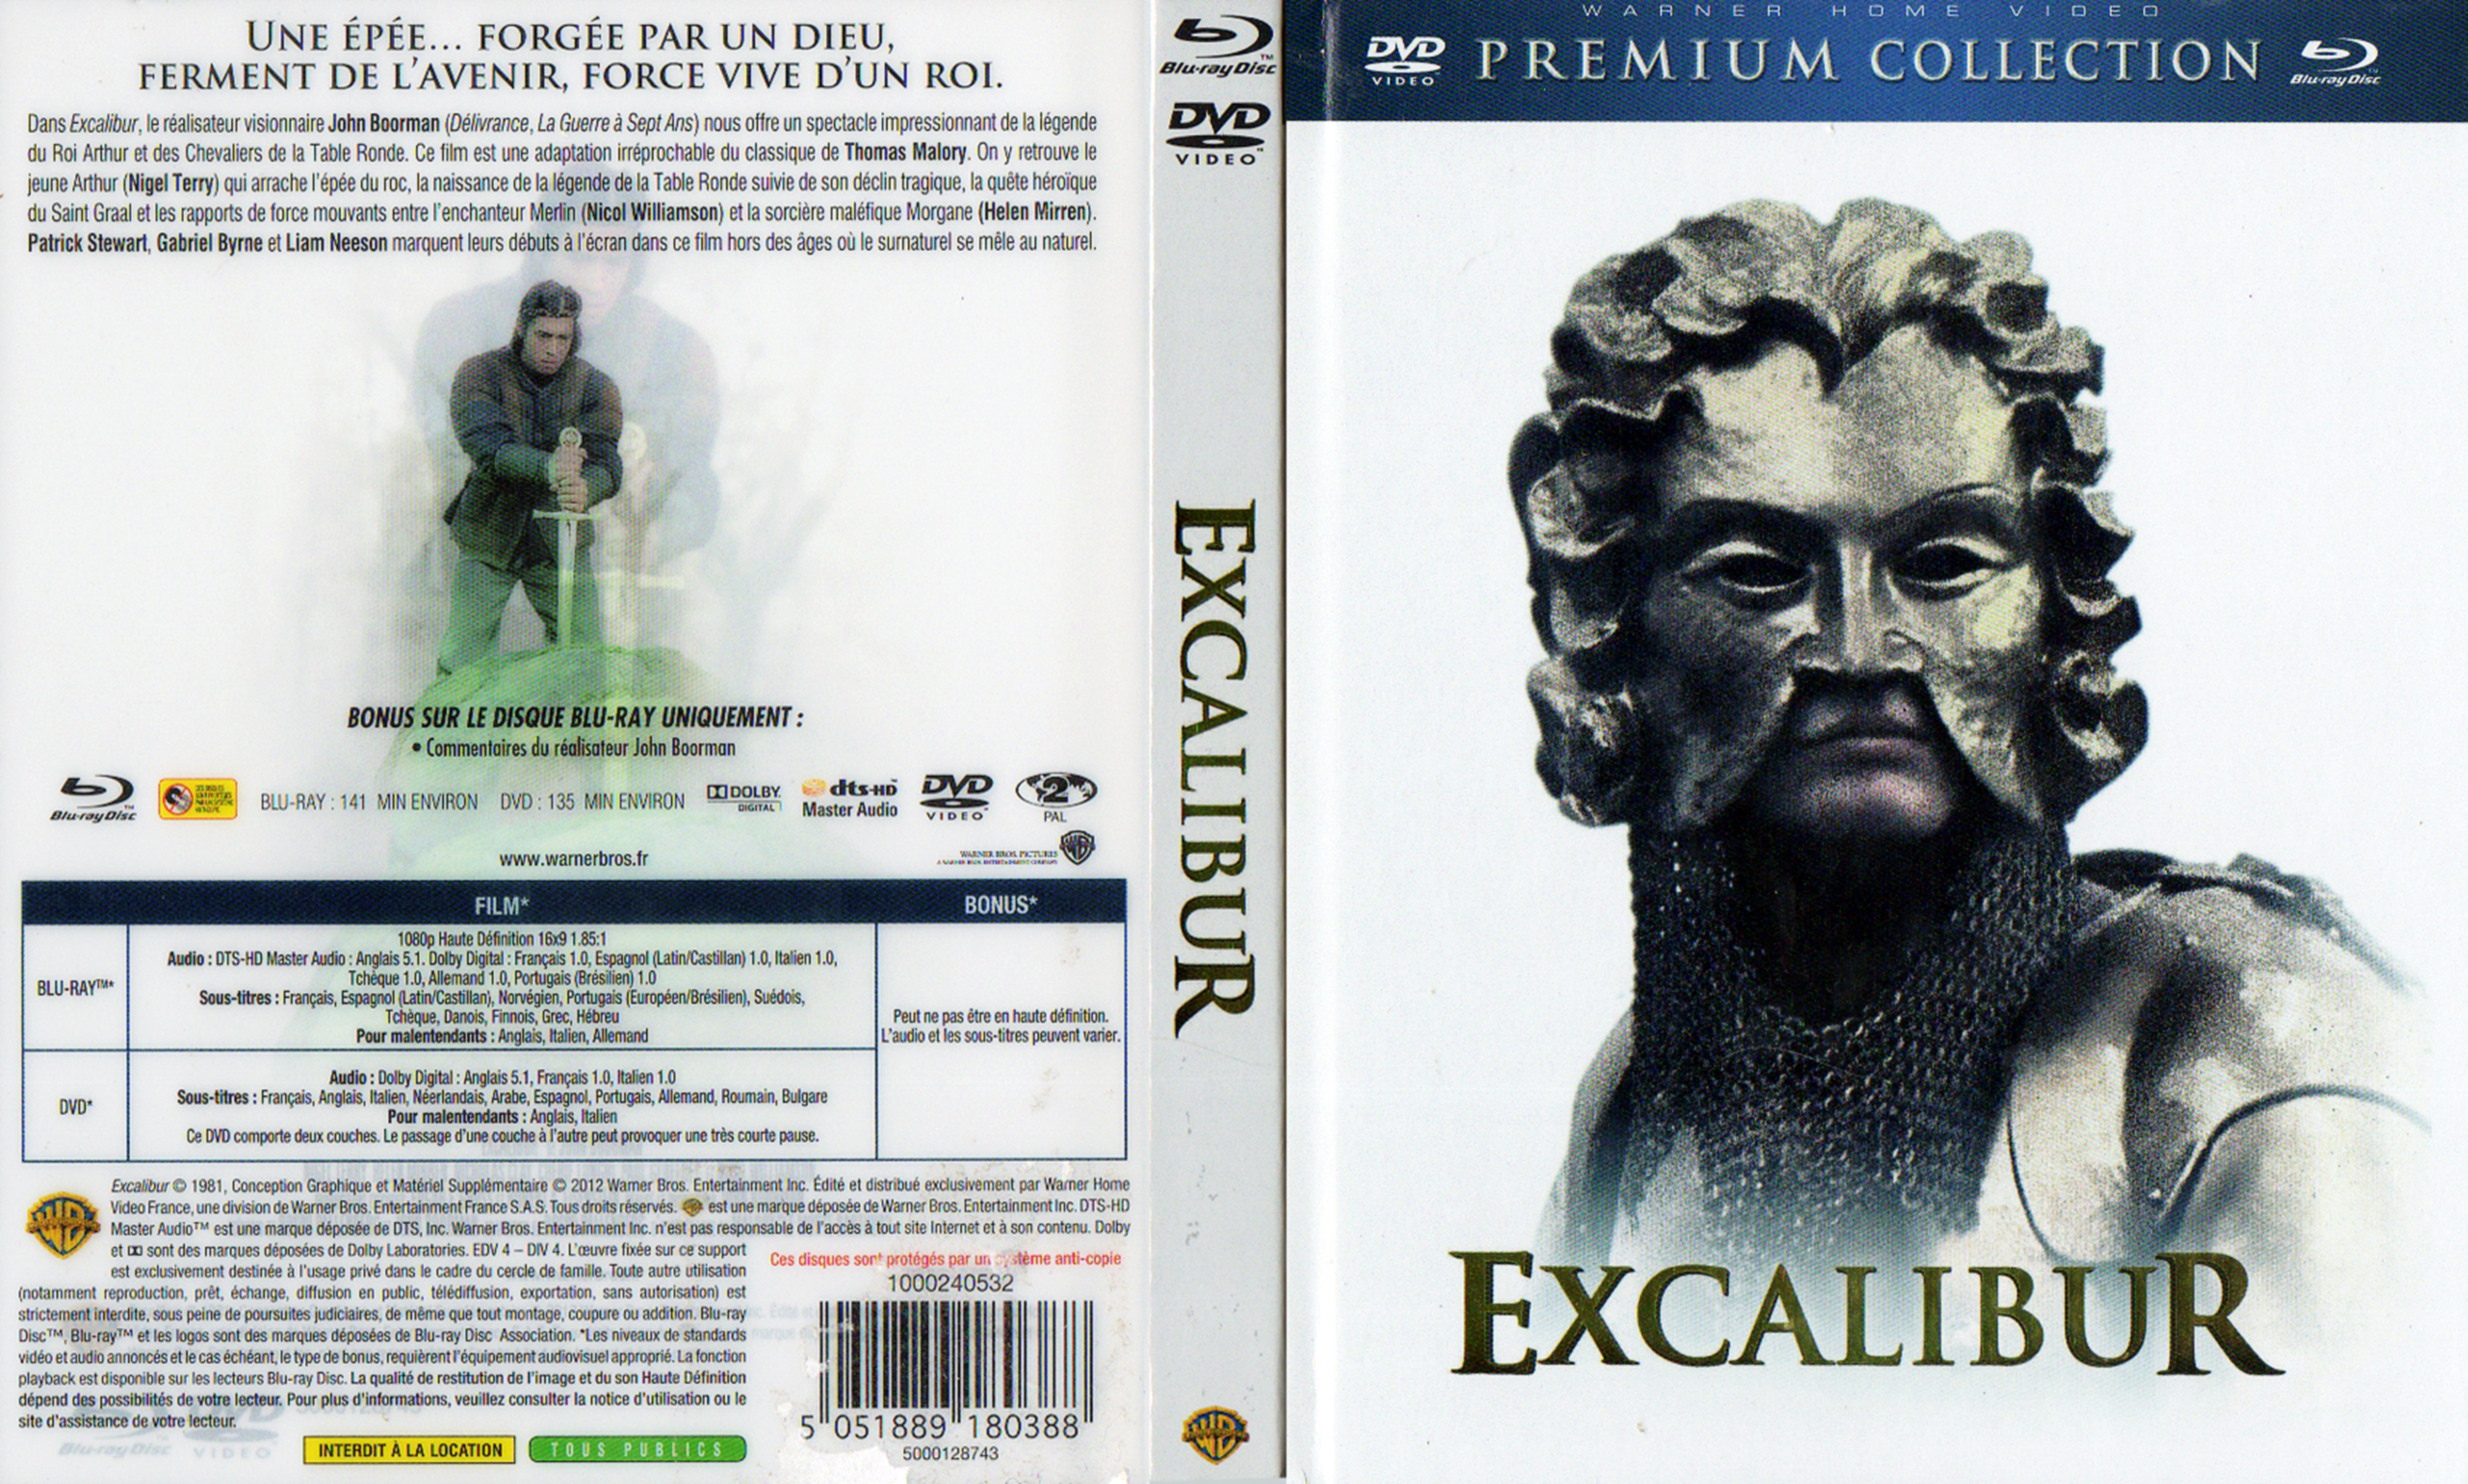 Jaquette DVD Excalibur (BLU-RAY) v2